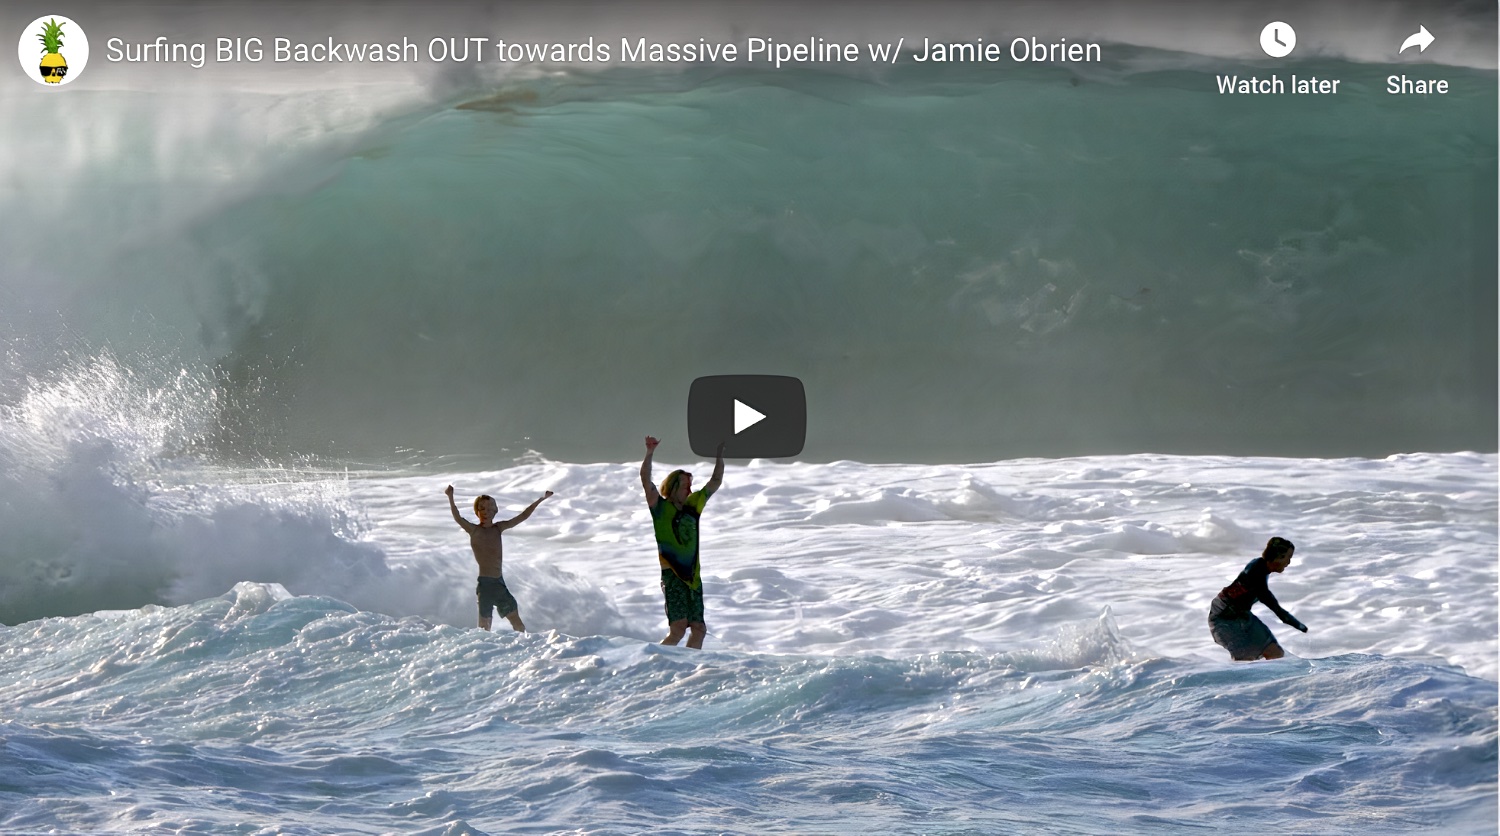 co-vids gravy gets blown up with job at pipe